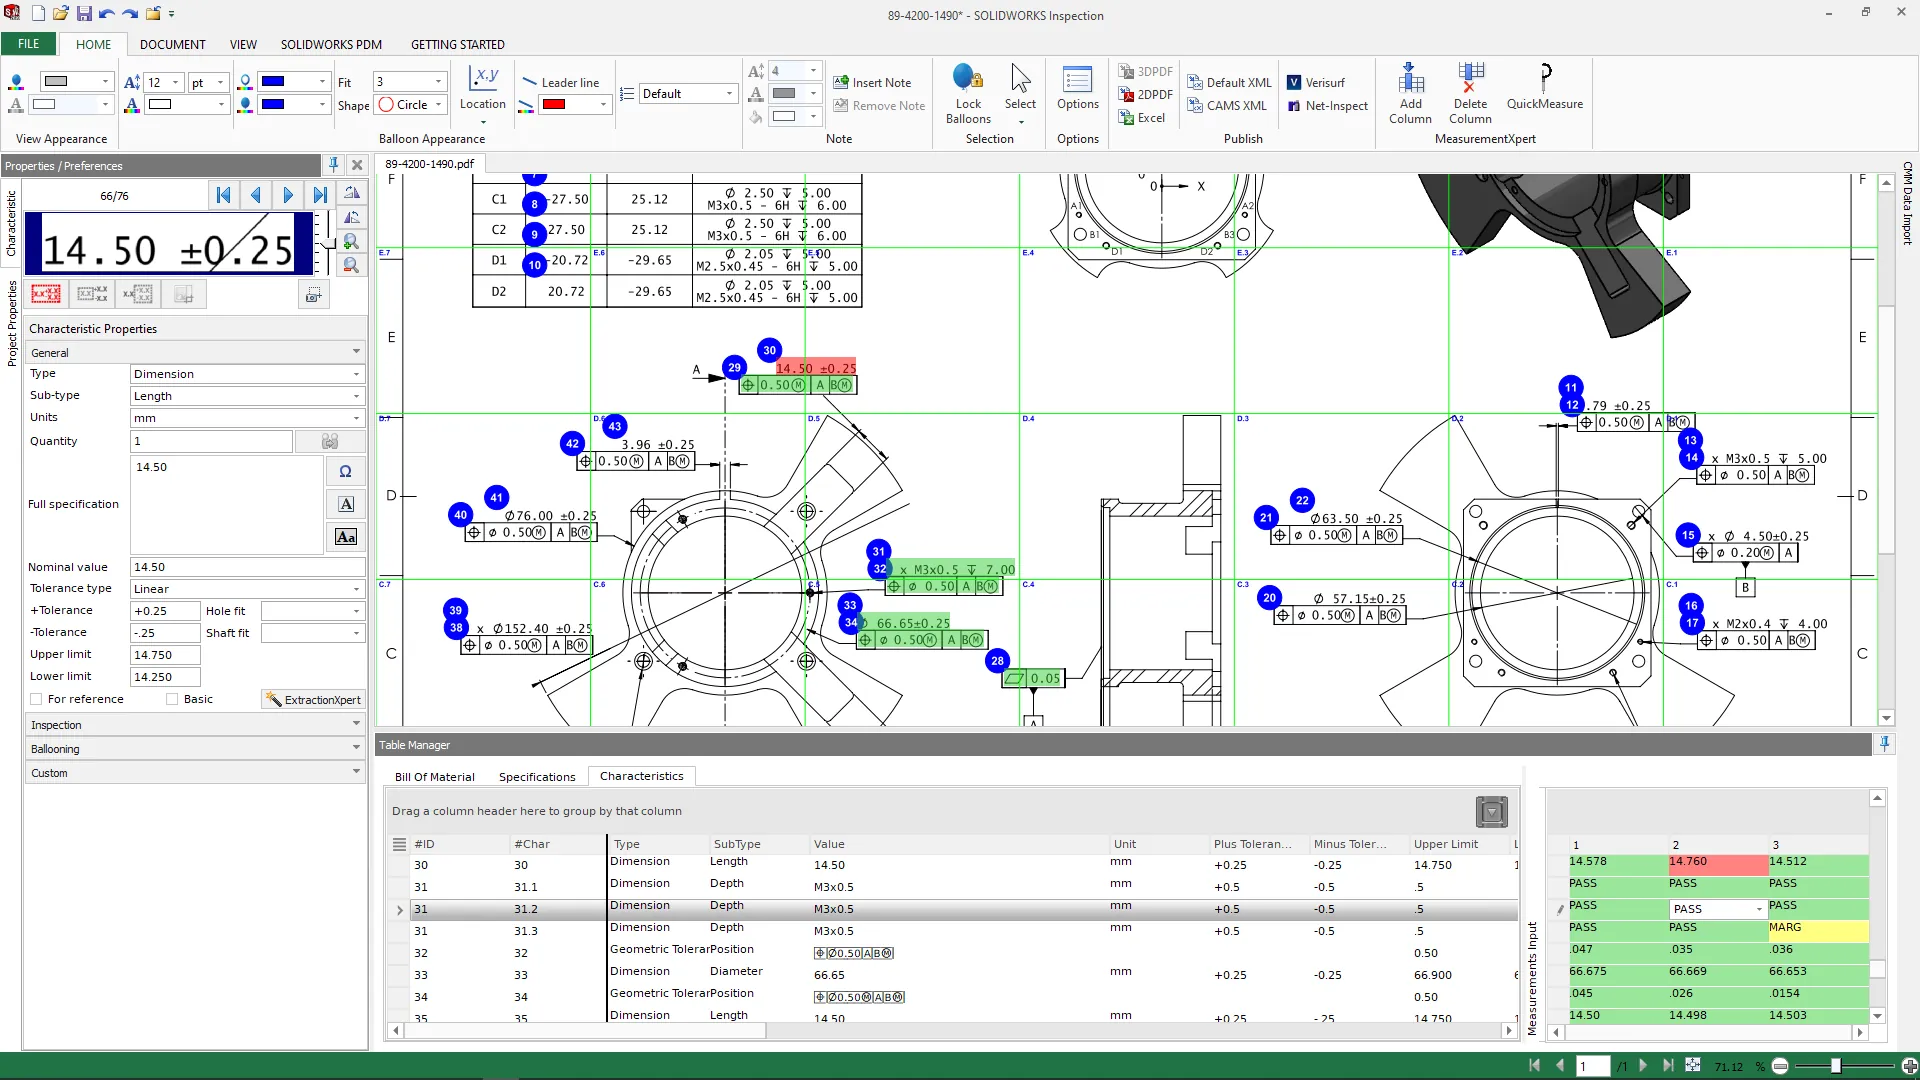 Learn How to Consolidate Reports with SOLIDWORKS Inspection